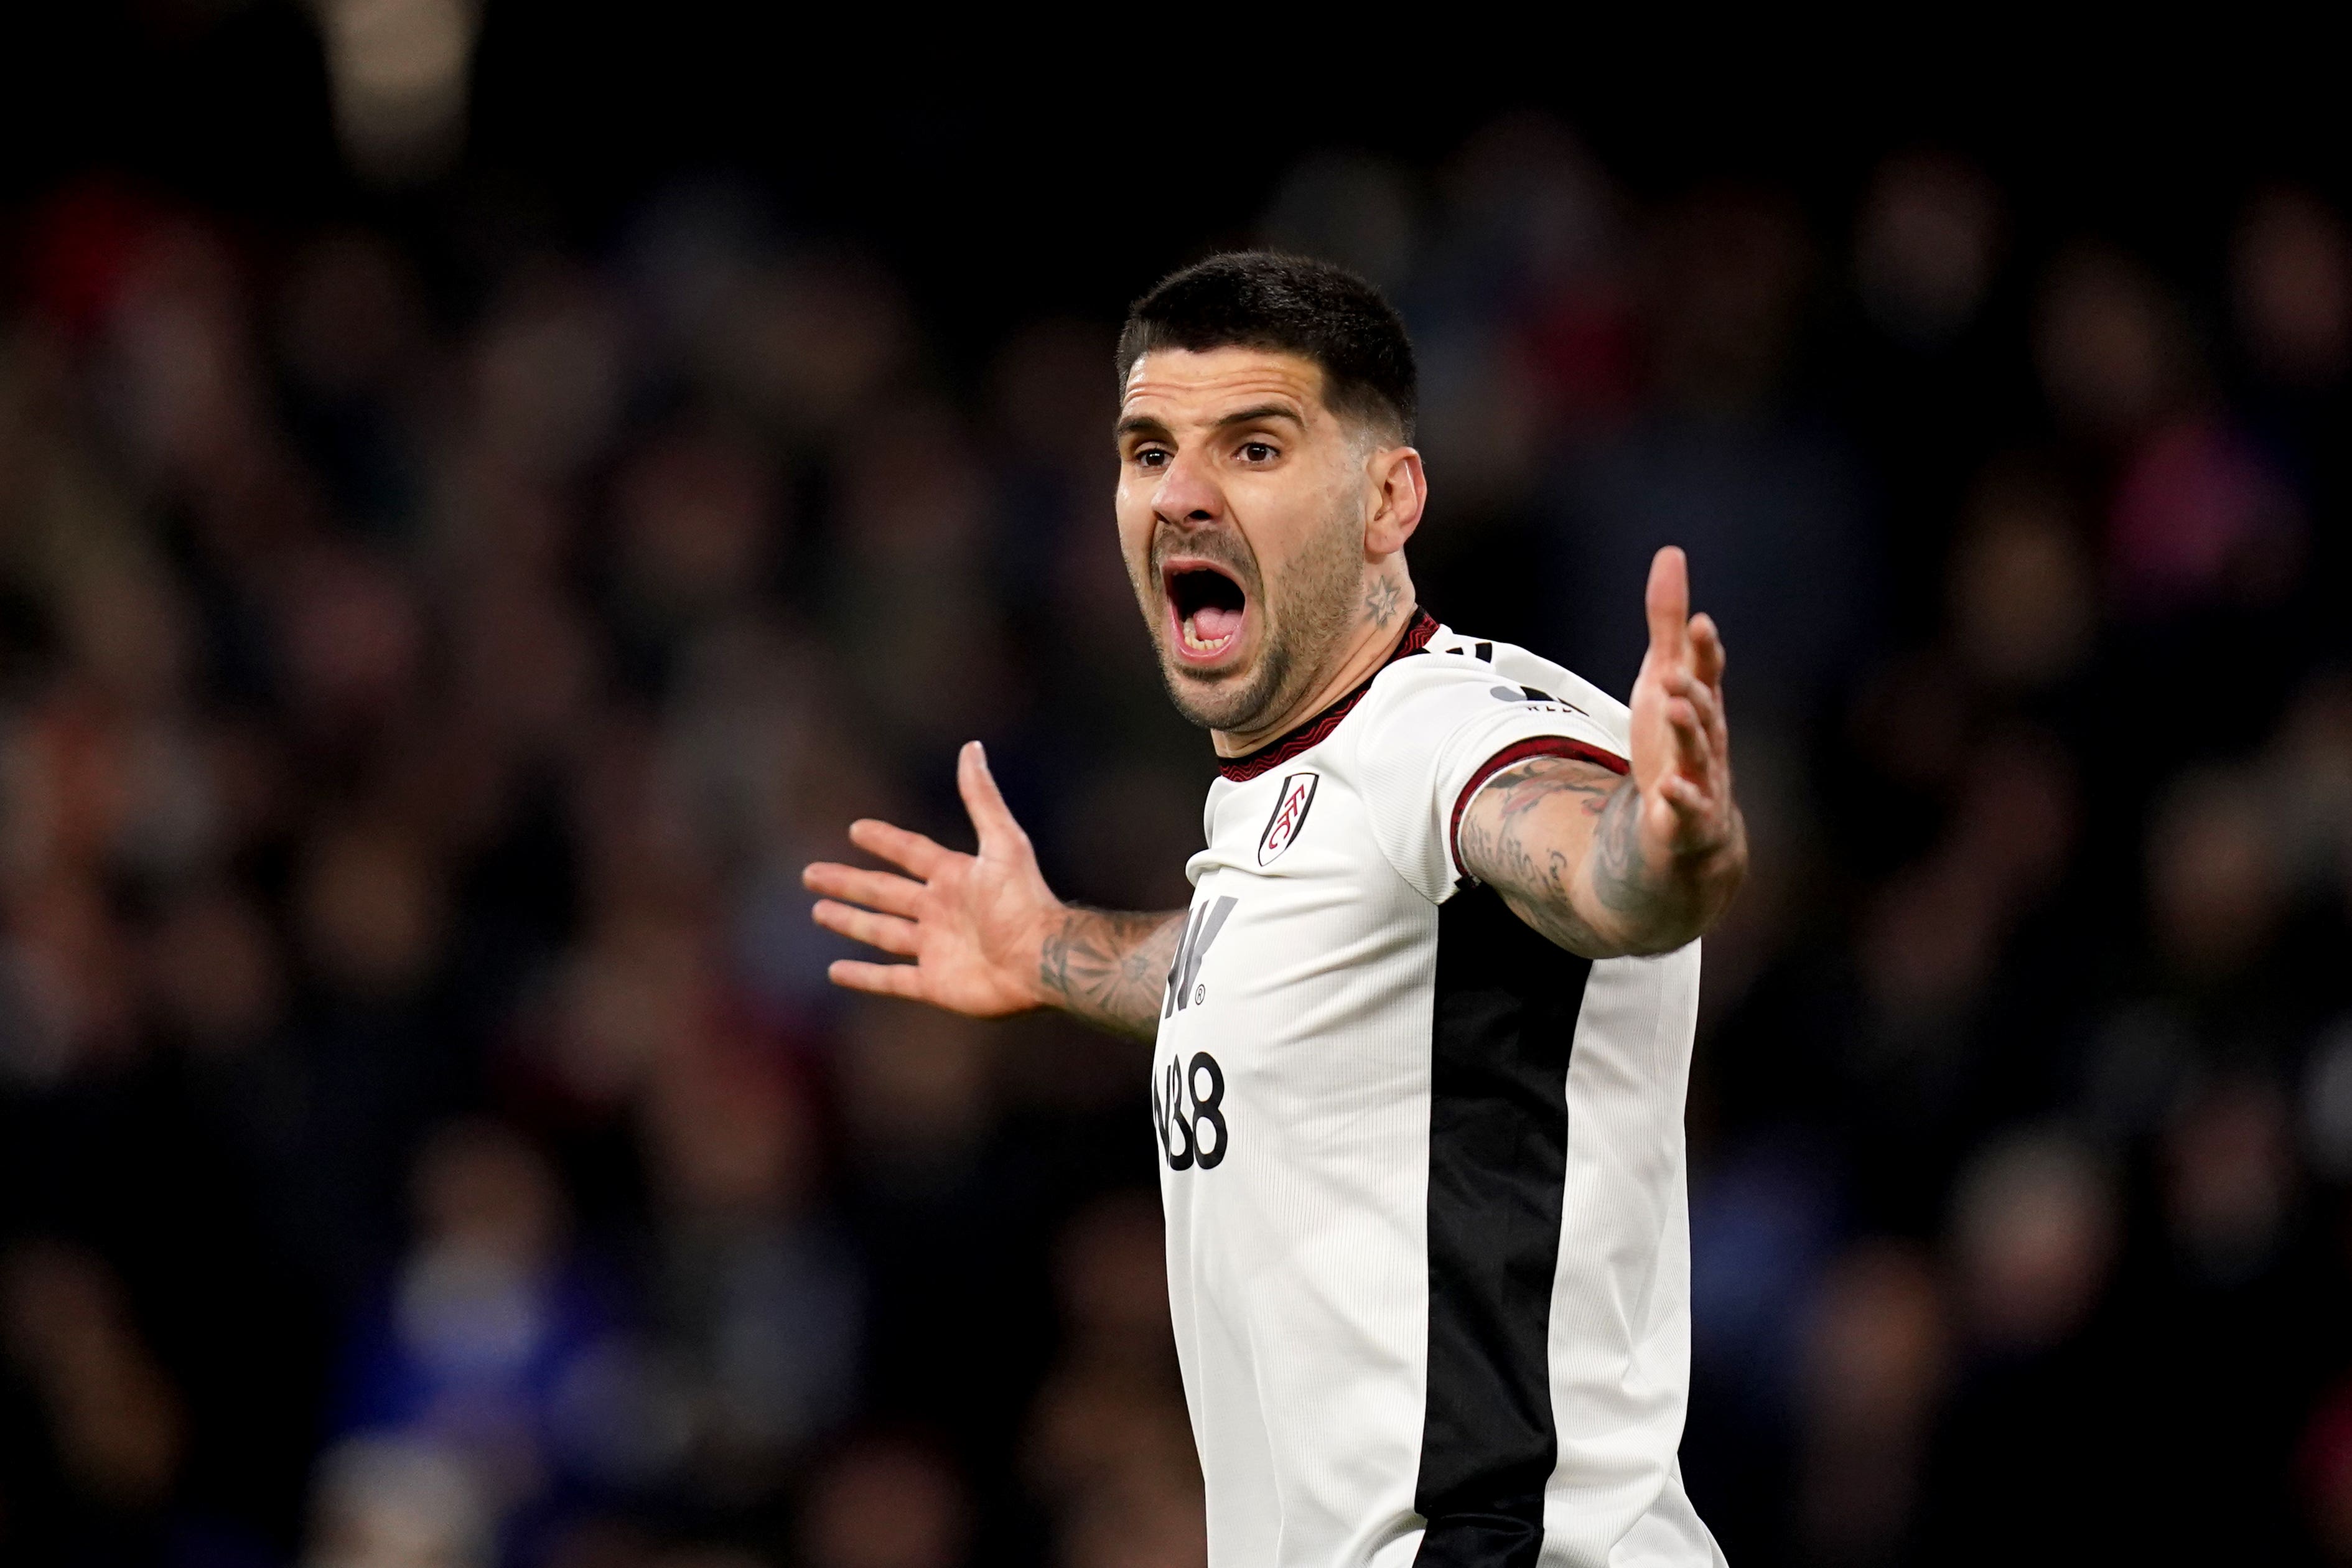 Aleksandar Mitrovic will lead the line for Fulham once more